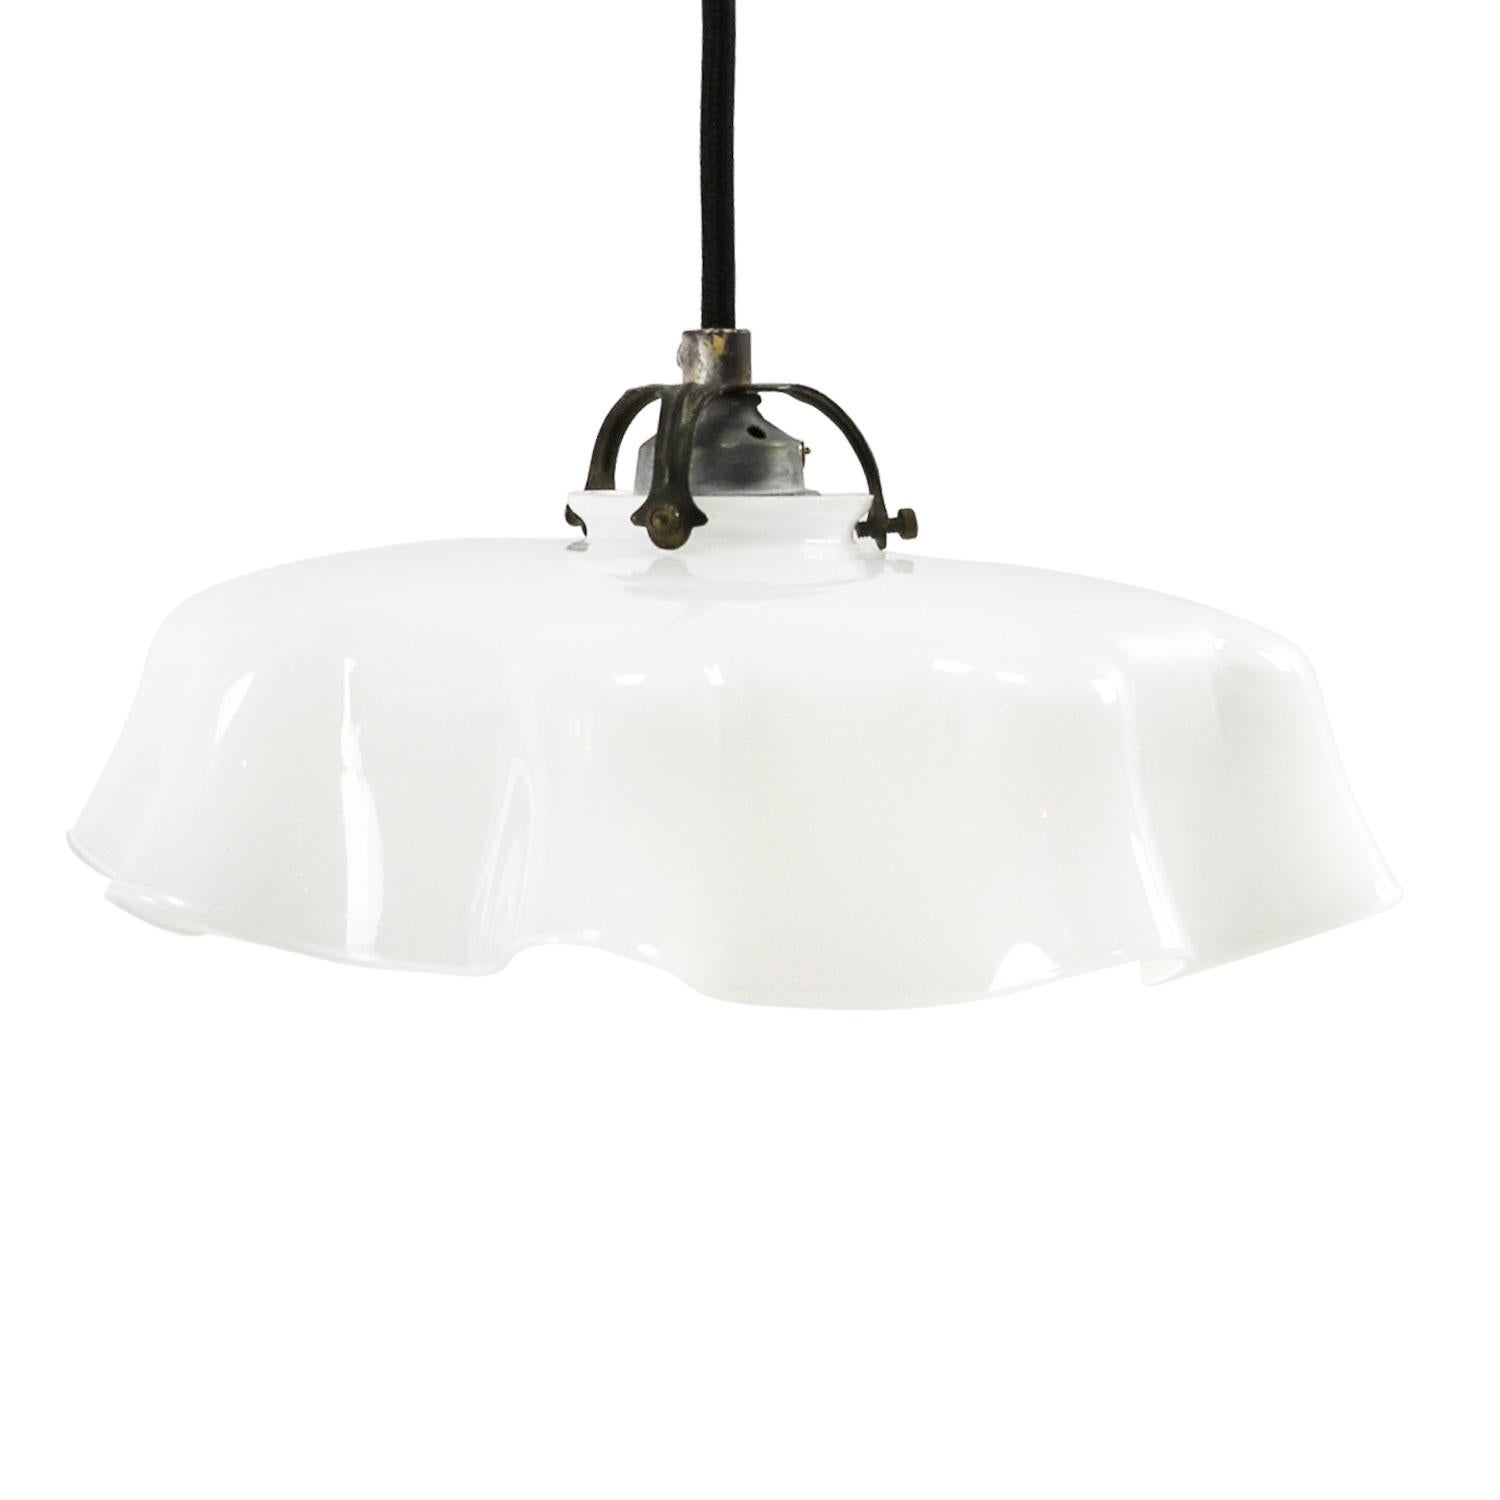 Dutch opaline glass industrial pendant.
Excluding light bulb.

Weight 1.50 kg / 3.3 lb

All lamps have been made suitable by international standards for incandescent light bulbs, energy-efficient and LED bulbs. E26/E27 bulb holders and new